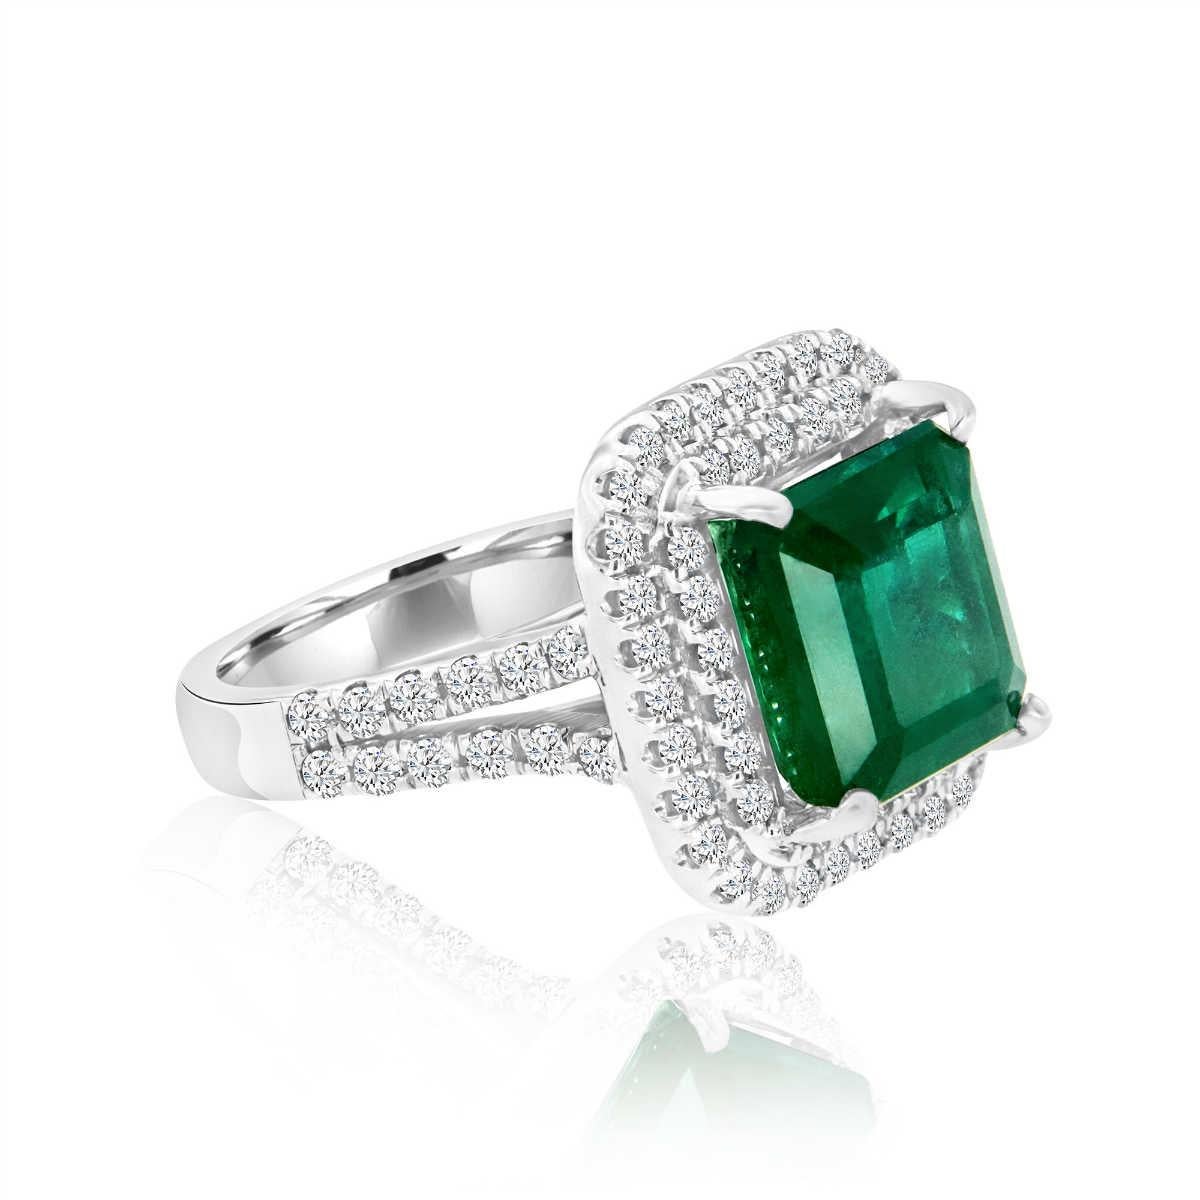 This Red Carpet stunning handcrafted ring features 5.21 Green Natural emerald in premium color. The emerald encircled by two rows of micro-prong set round brilliant diamonds. To complete the glamorous look of this ring, we designed two rows of round